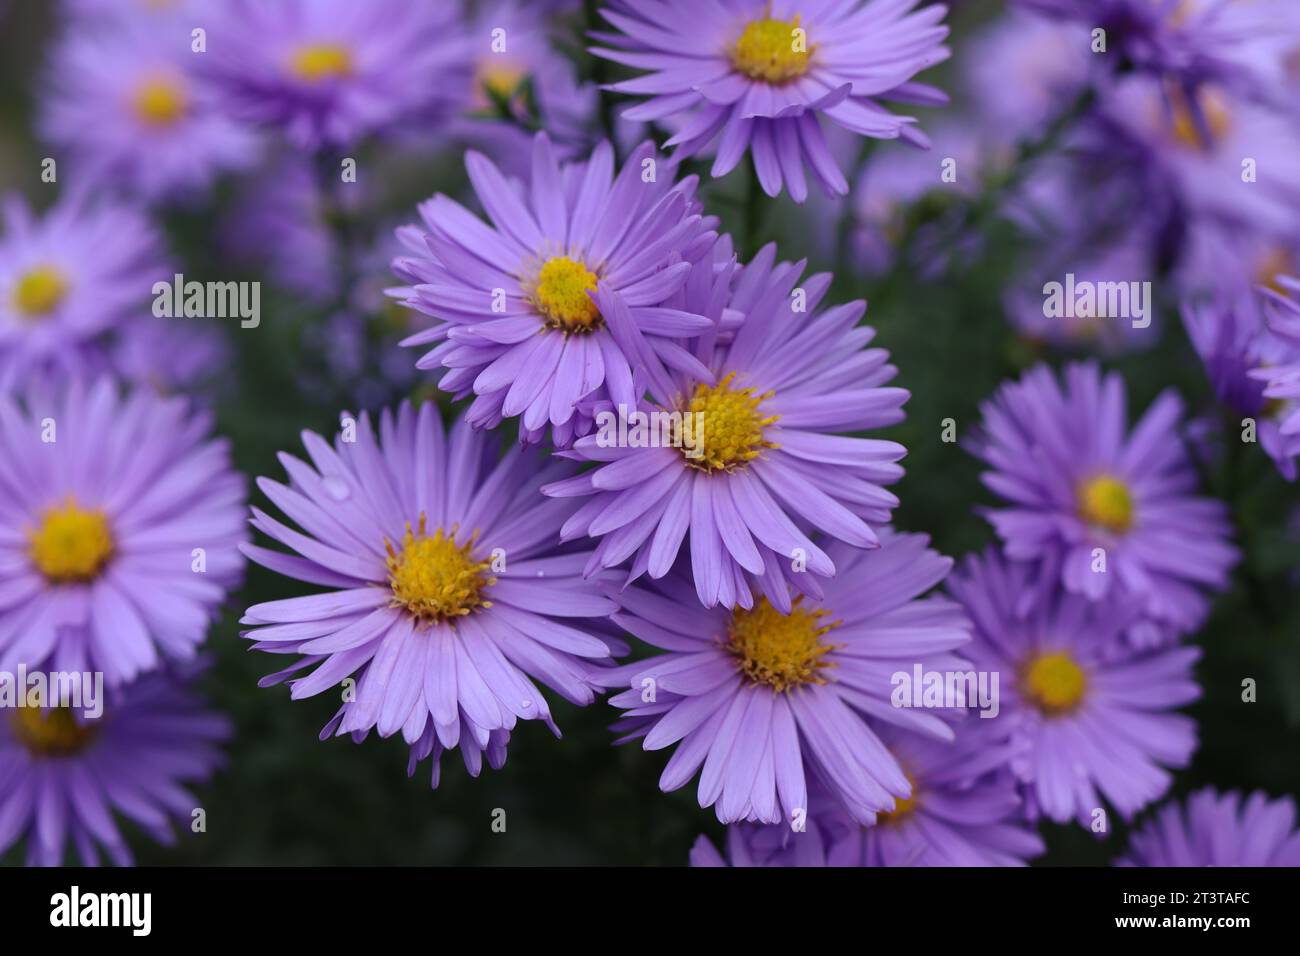 delightful array of aster flowers comes together to form a stunning floral display. Stock Photo